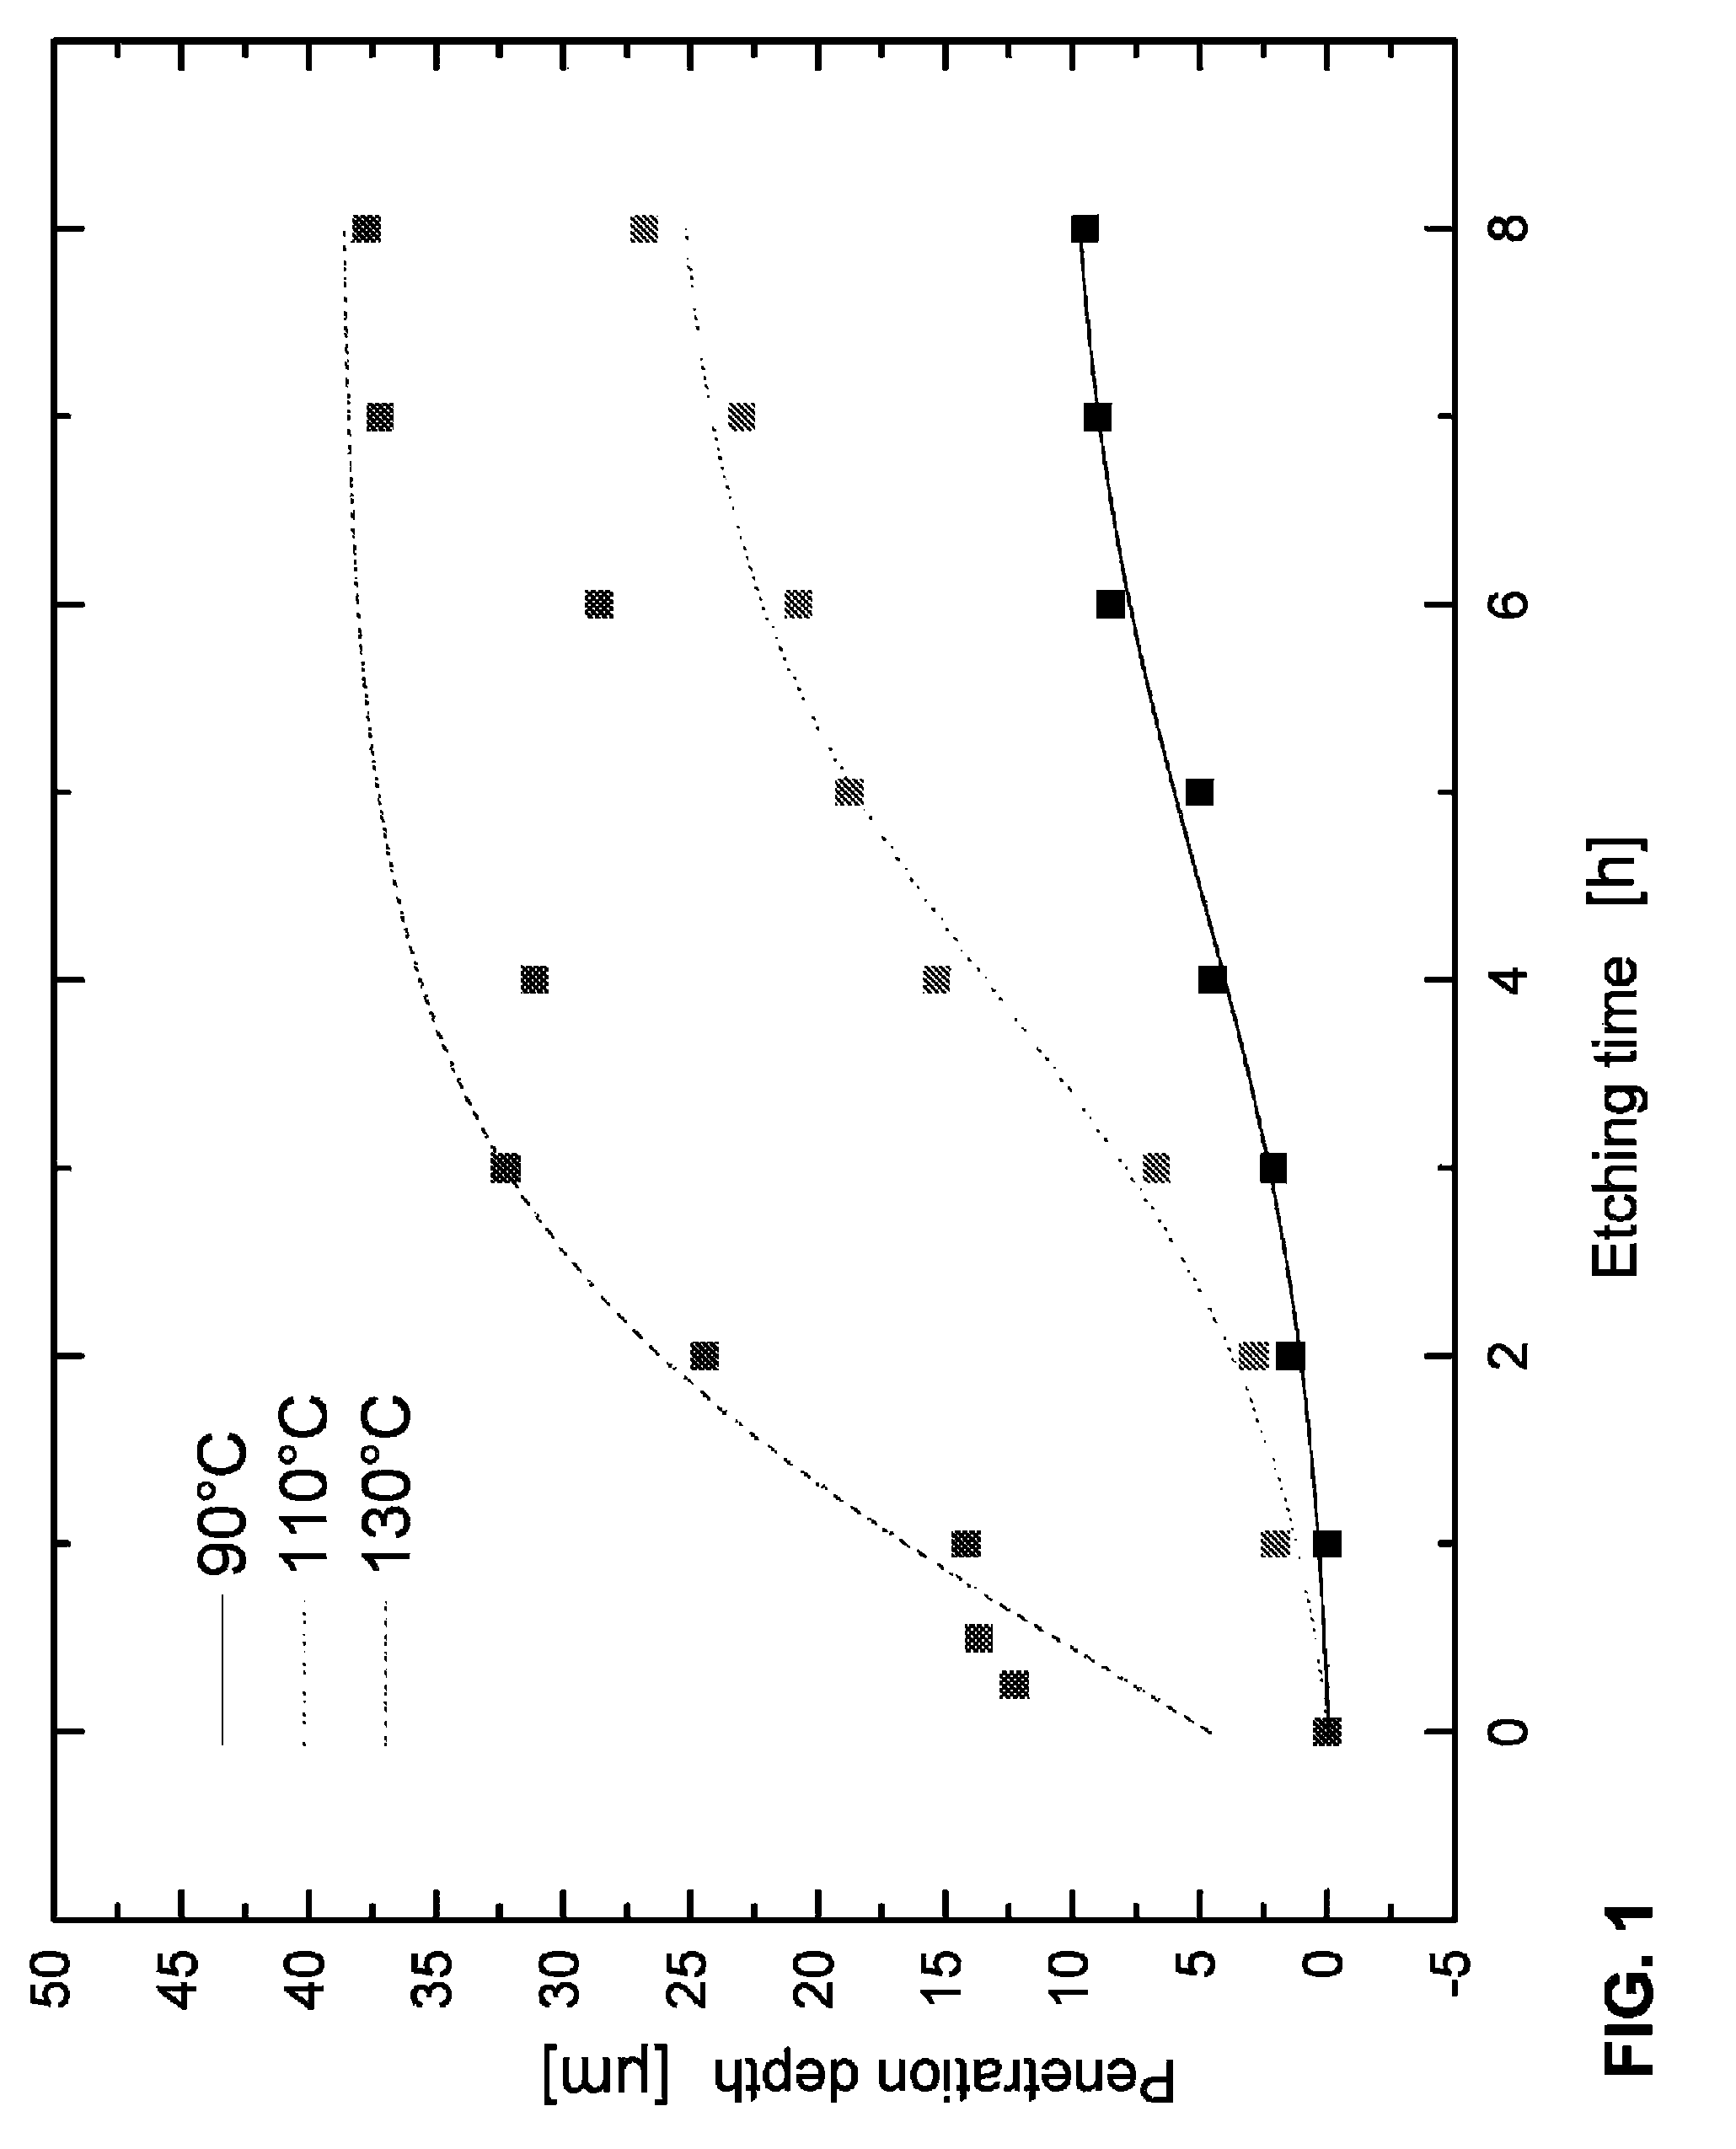 Ceramic substrate material, method for the production and use thereof, and antenna or antenna array